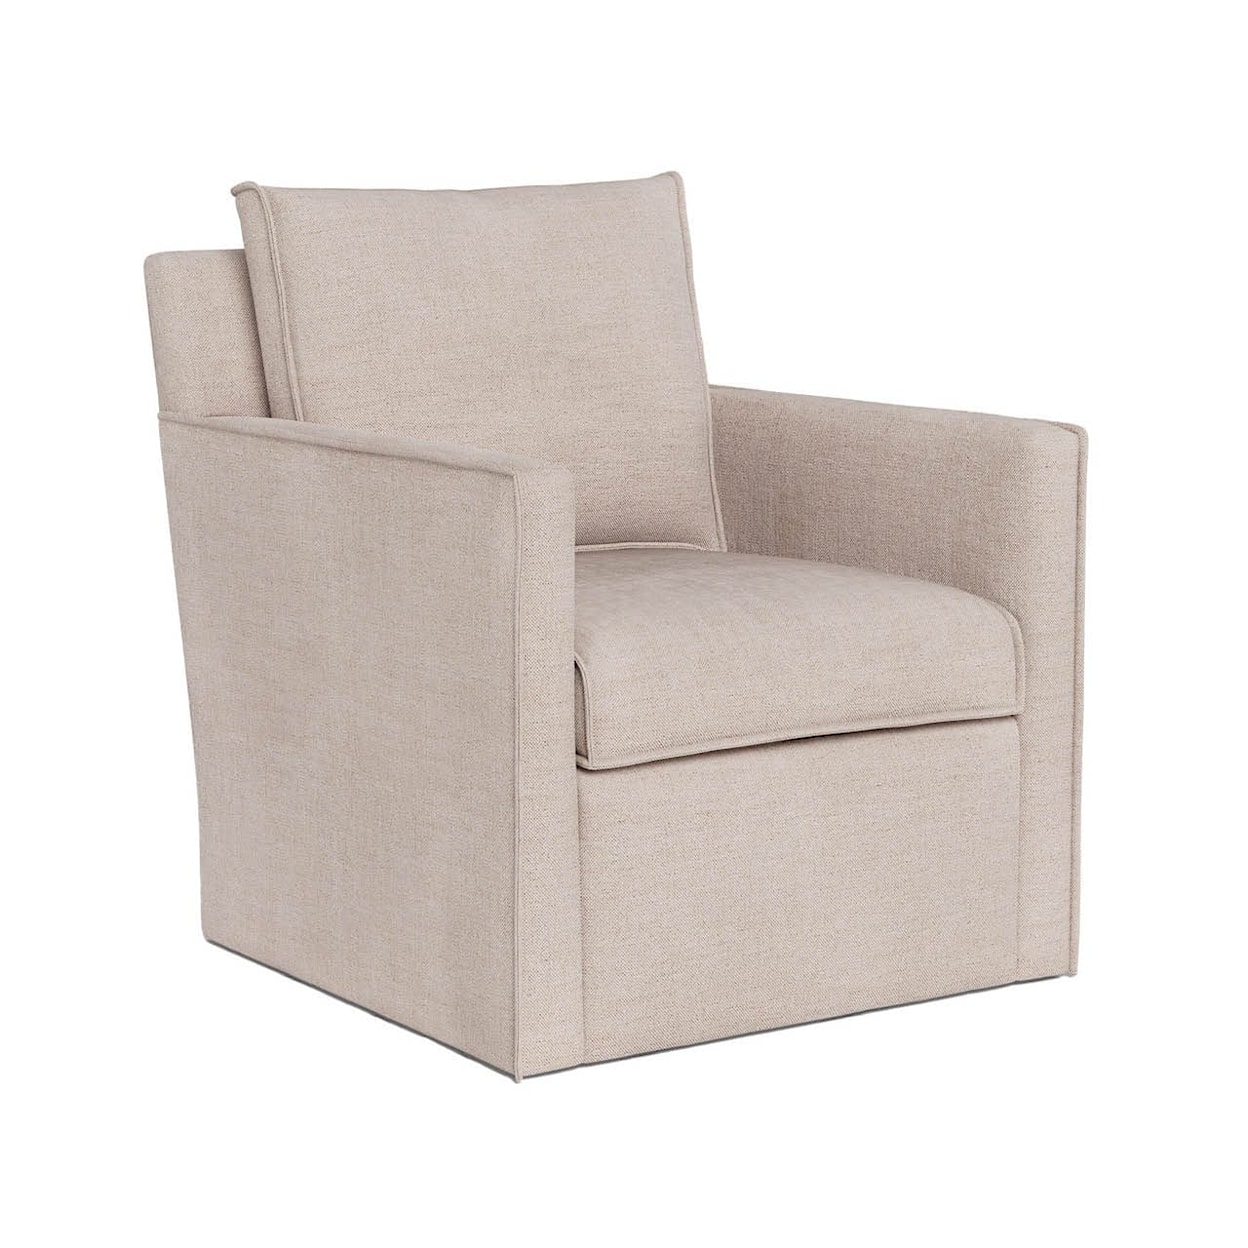 Universal Special Order Barley Swivel Chair